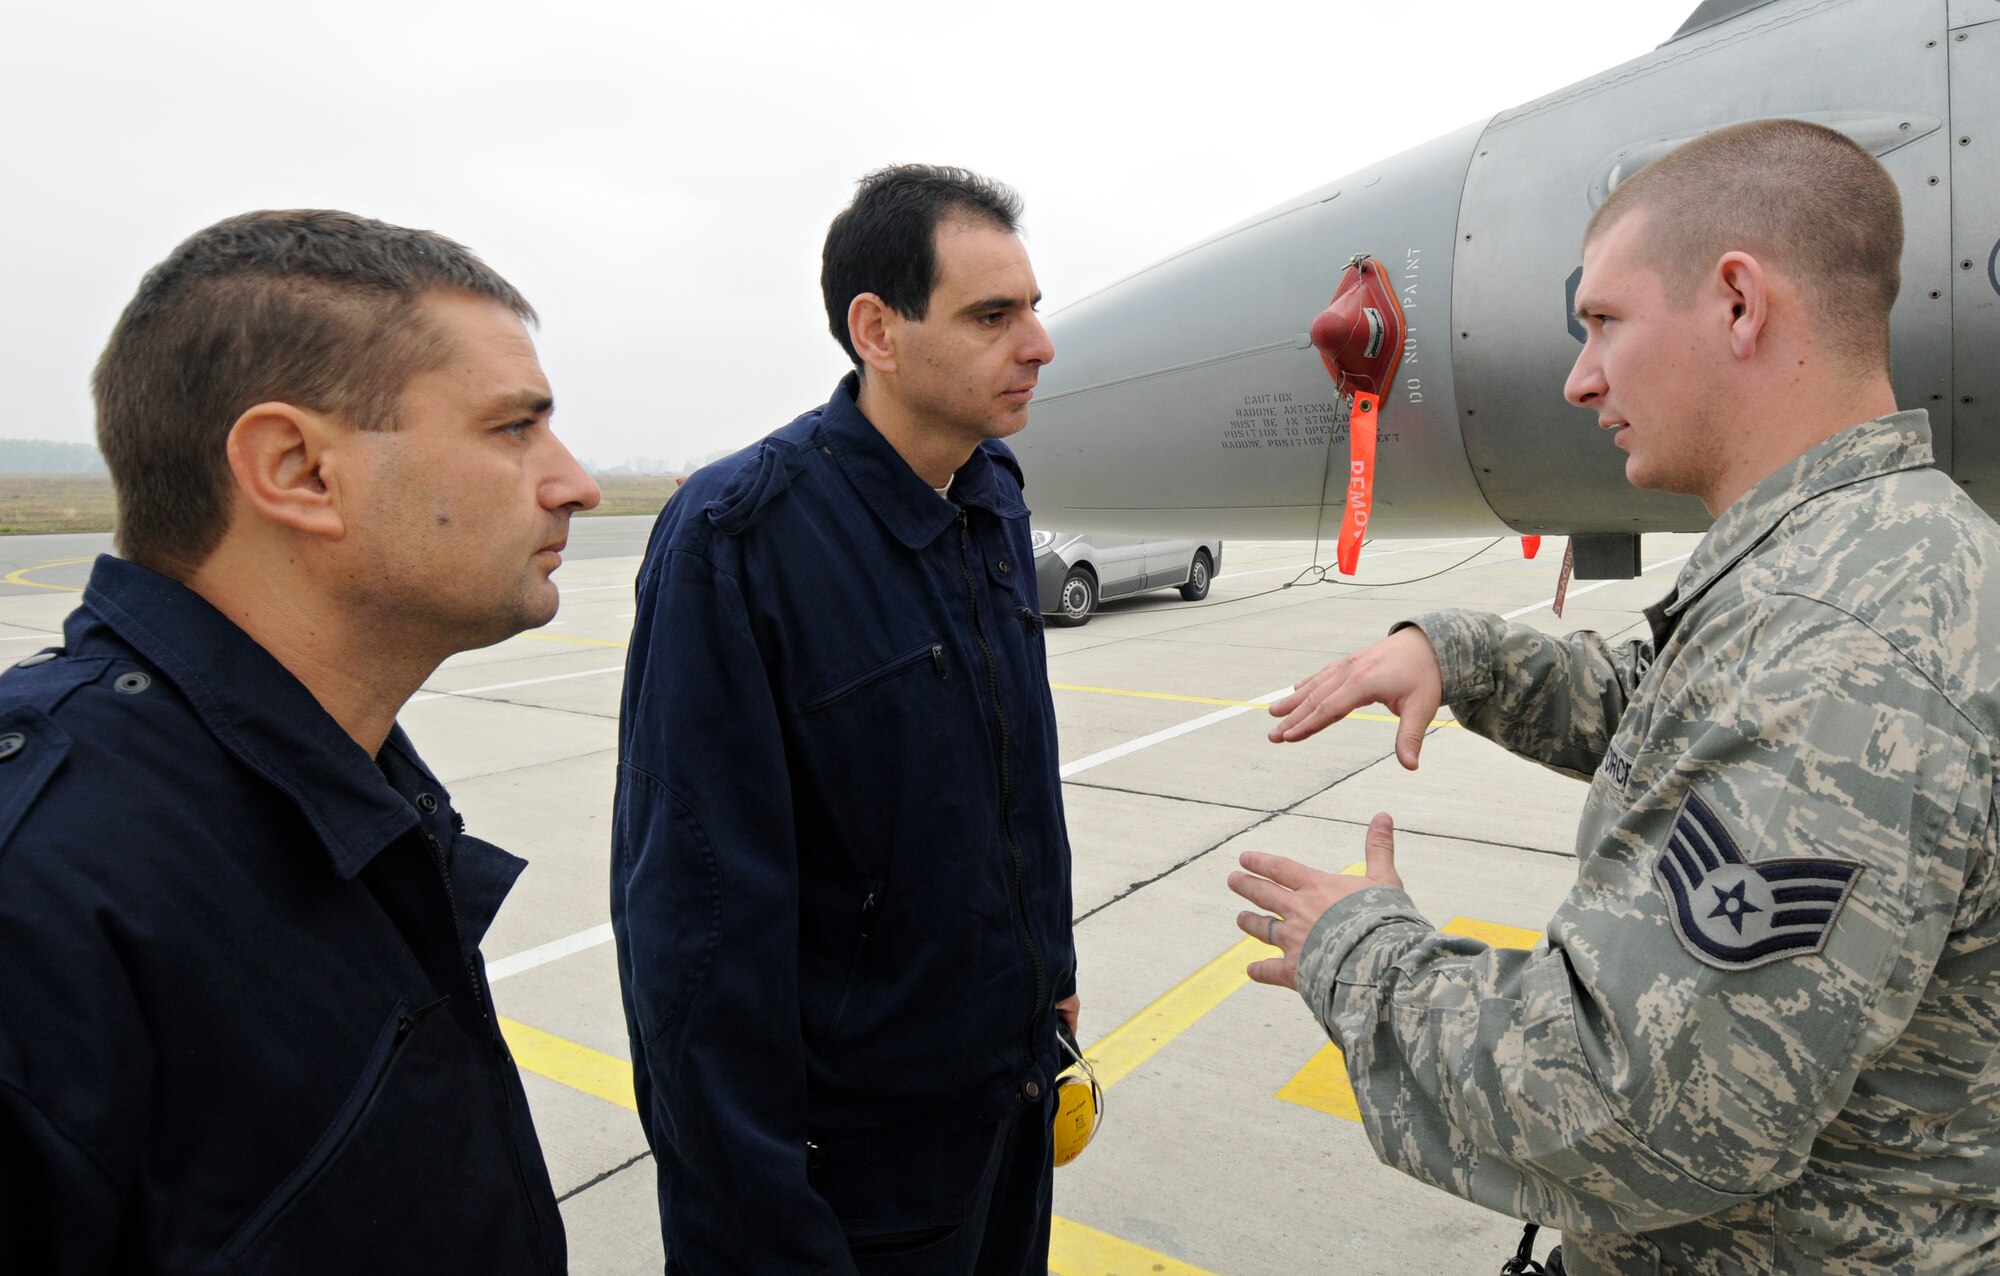 GRAF IGNATIEVO AIR FORCE BASE, Bulgaria - Staff Sgt. Adam Hendriksen, 52nd Aircraft Maintenance Squadron electrical and environmental technician, explains the components of an F-16 Fighting Falcon to his Bulgarian air force counterparts, Capt. Rumen Marinov, left, and 1st Lieutenant Nicolag Stefanov, during Operation Thracian Star Oct. 13. The three-week, combined exercise gave U.S. and Bulgarian military members in many career fields the opportunity to share ideas and train together. (U.S. Air Force photo/Staff Sgt. Benjamin Wilson)